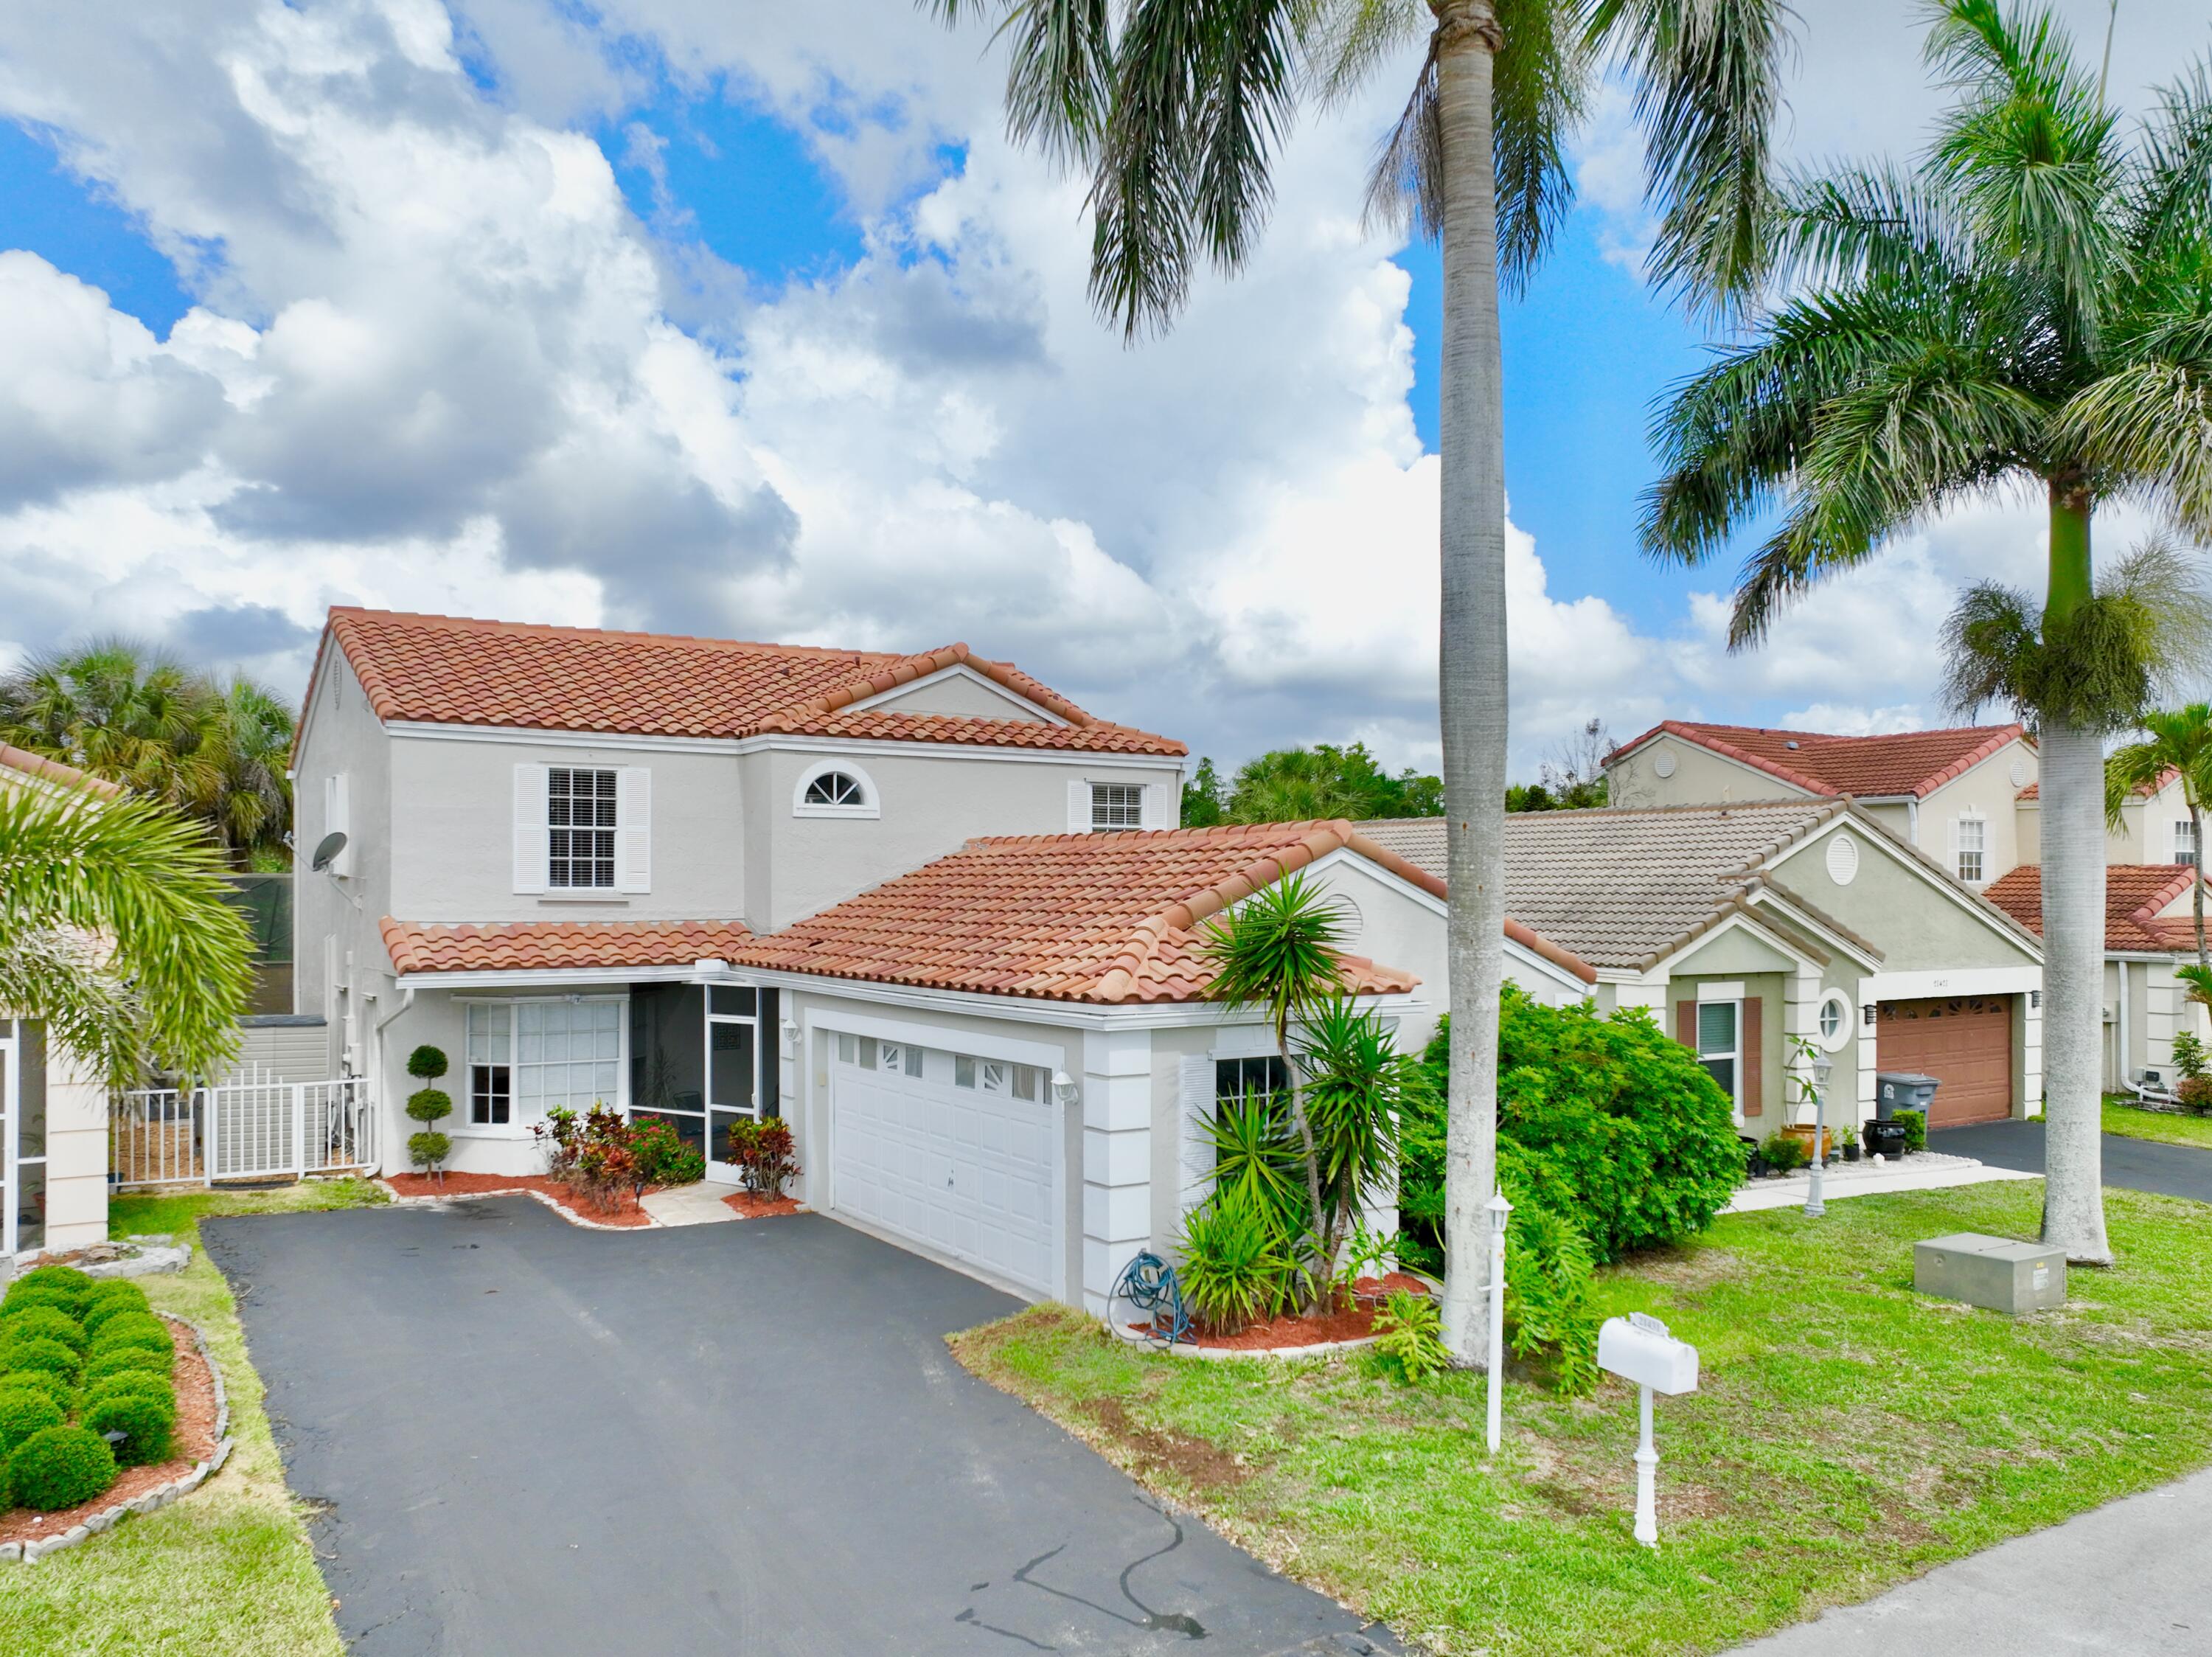 Property for Sale at 21431 Sawmill Court, Boca Raton, Palm Beach County, Florida - Bedrooms: 4 
Bathrooms: 2.5  - $729,000